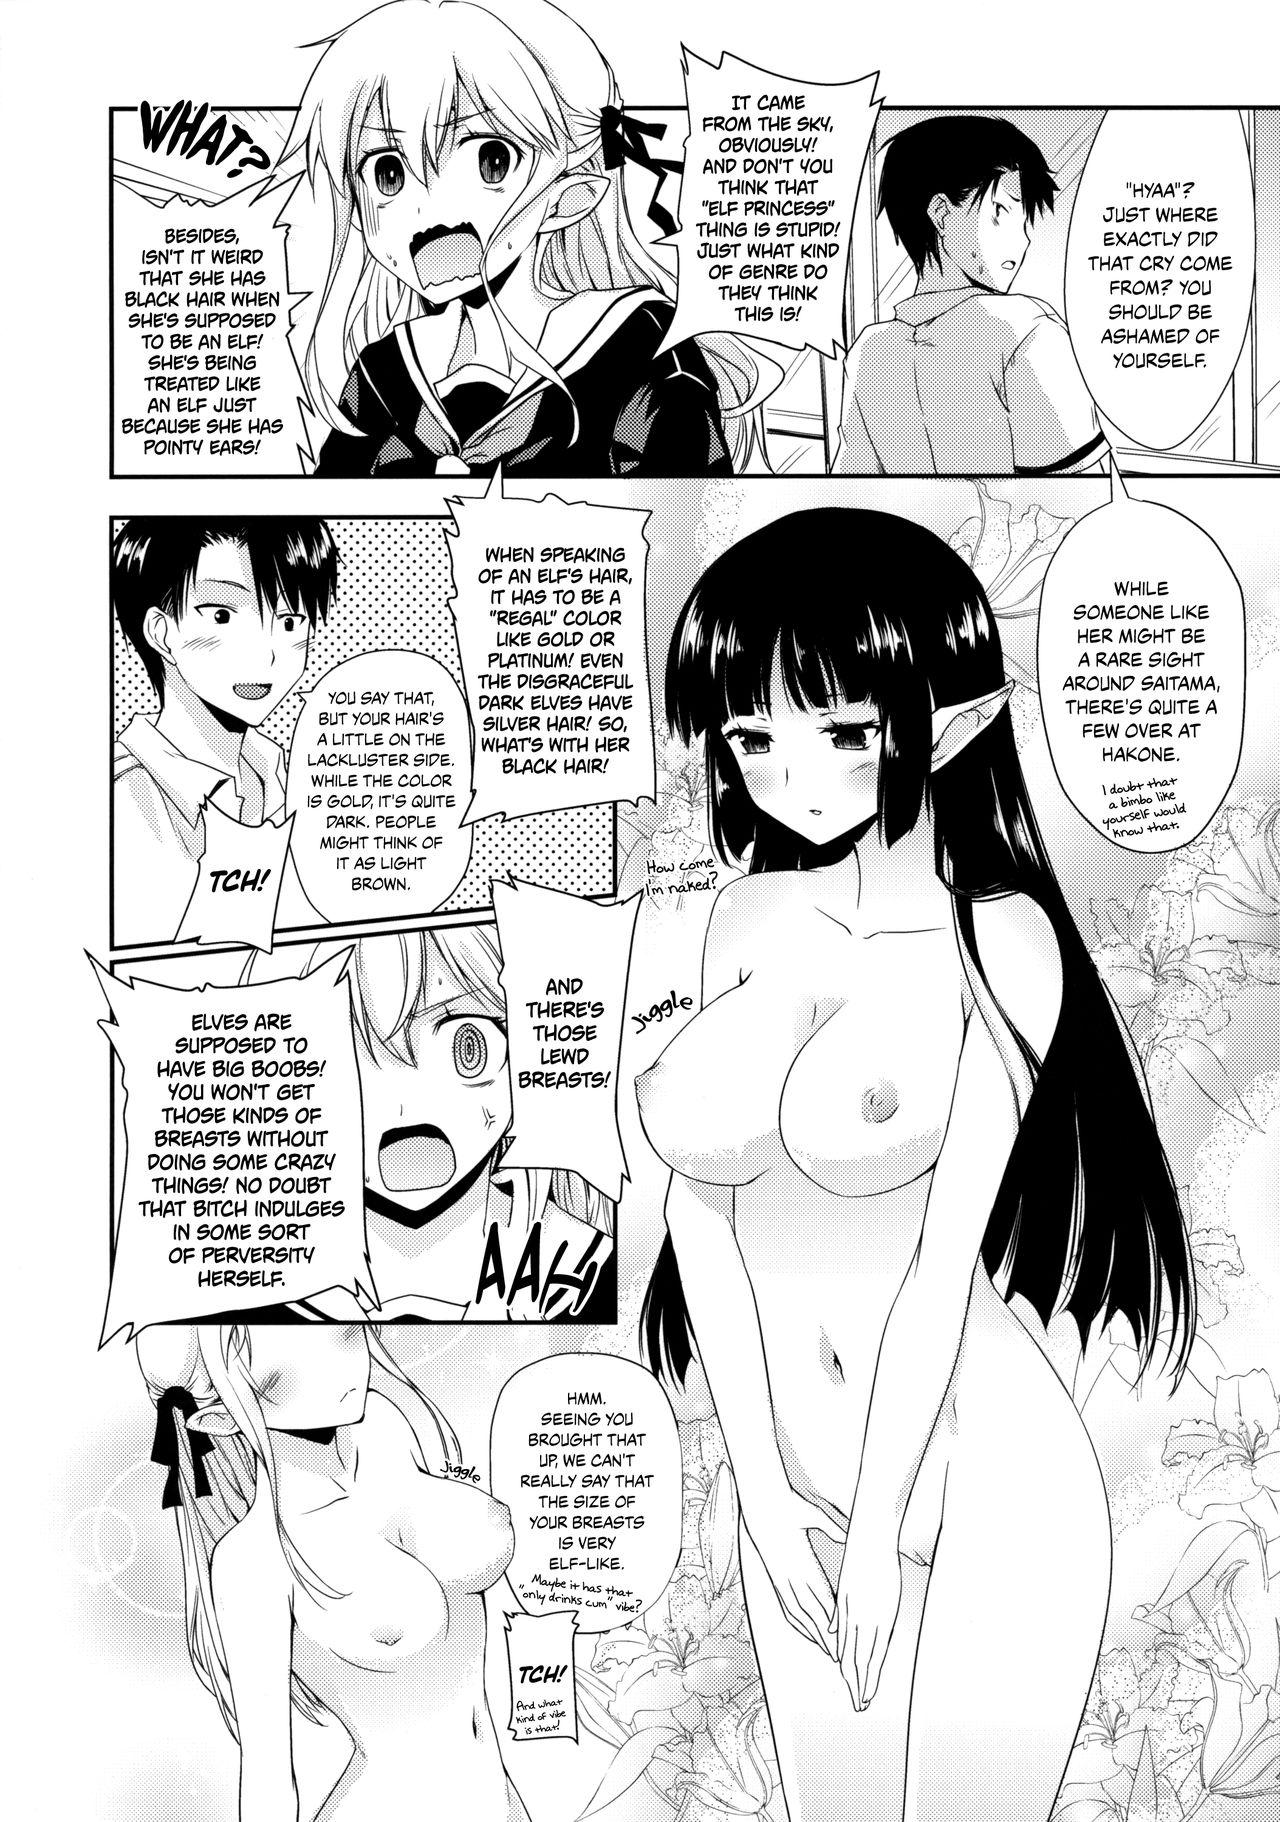 Best Blowjob Elf tte iu no wa! | The Thing About Elves! - Original Argentina - Page 5